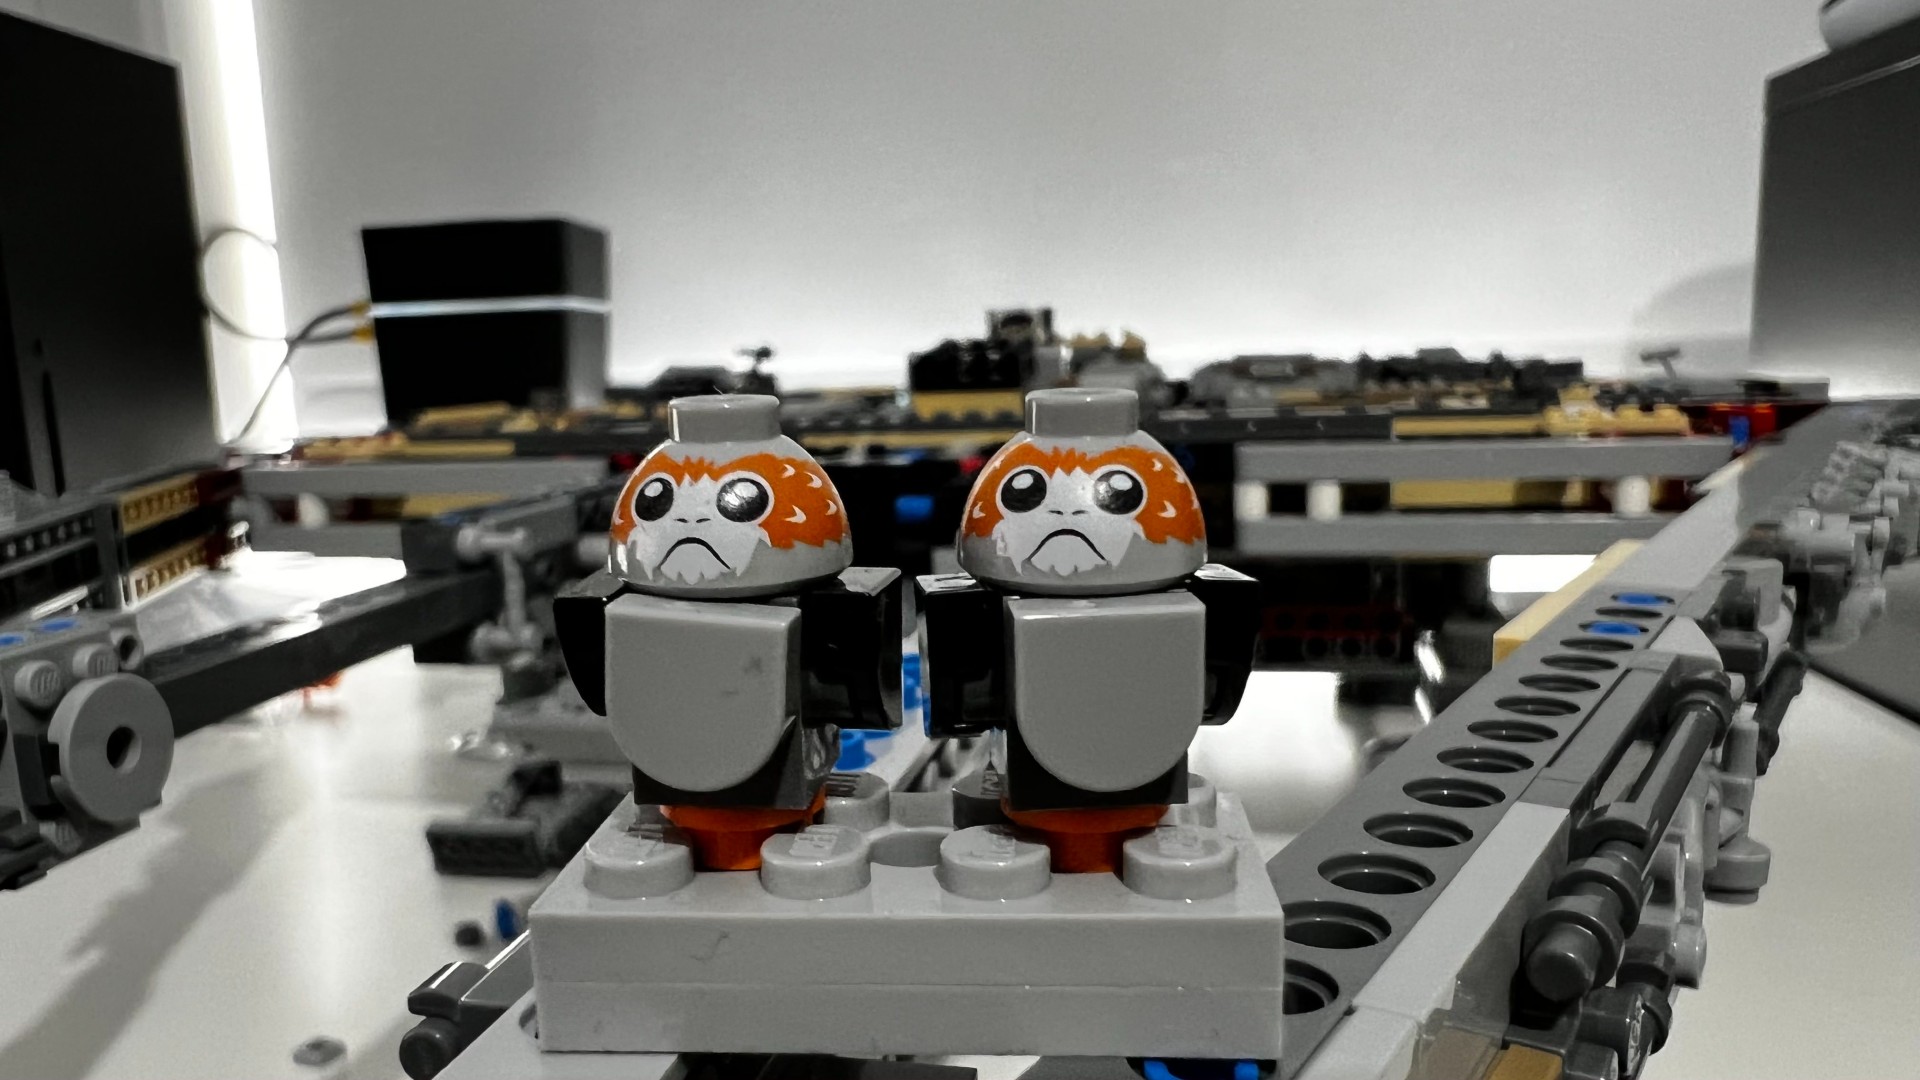 Lego Star Wars UCS Millennium Falcon 75192_Close up of two Porg minifigures